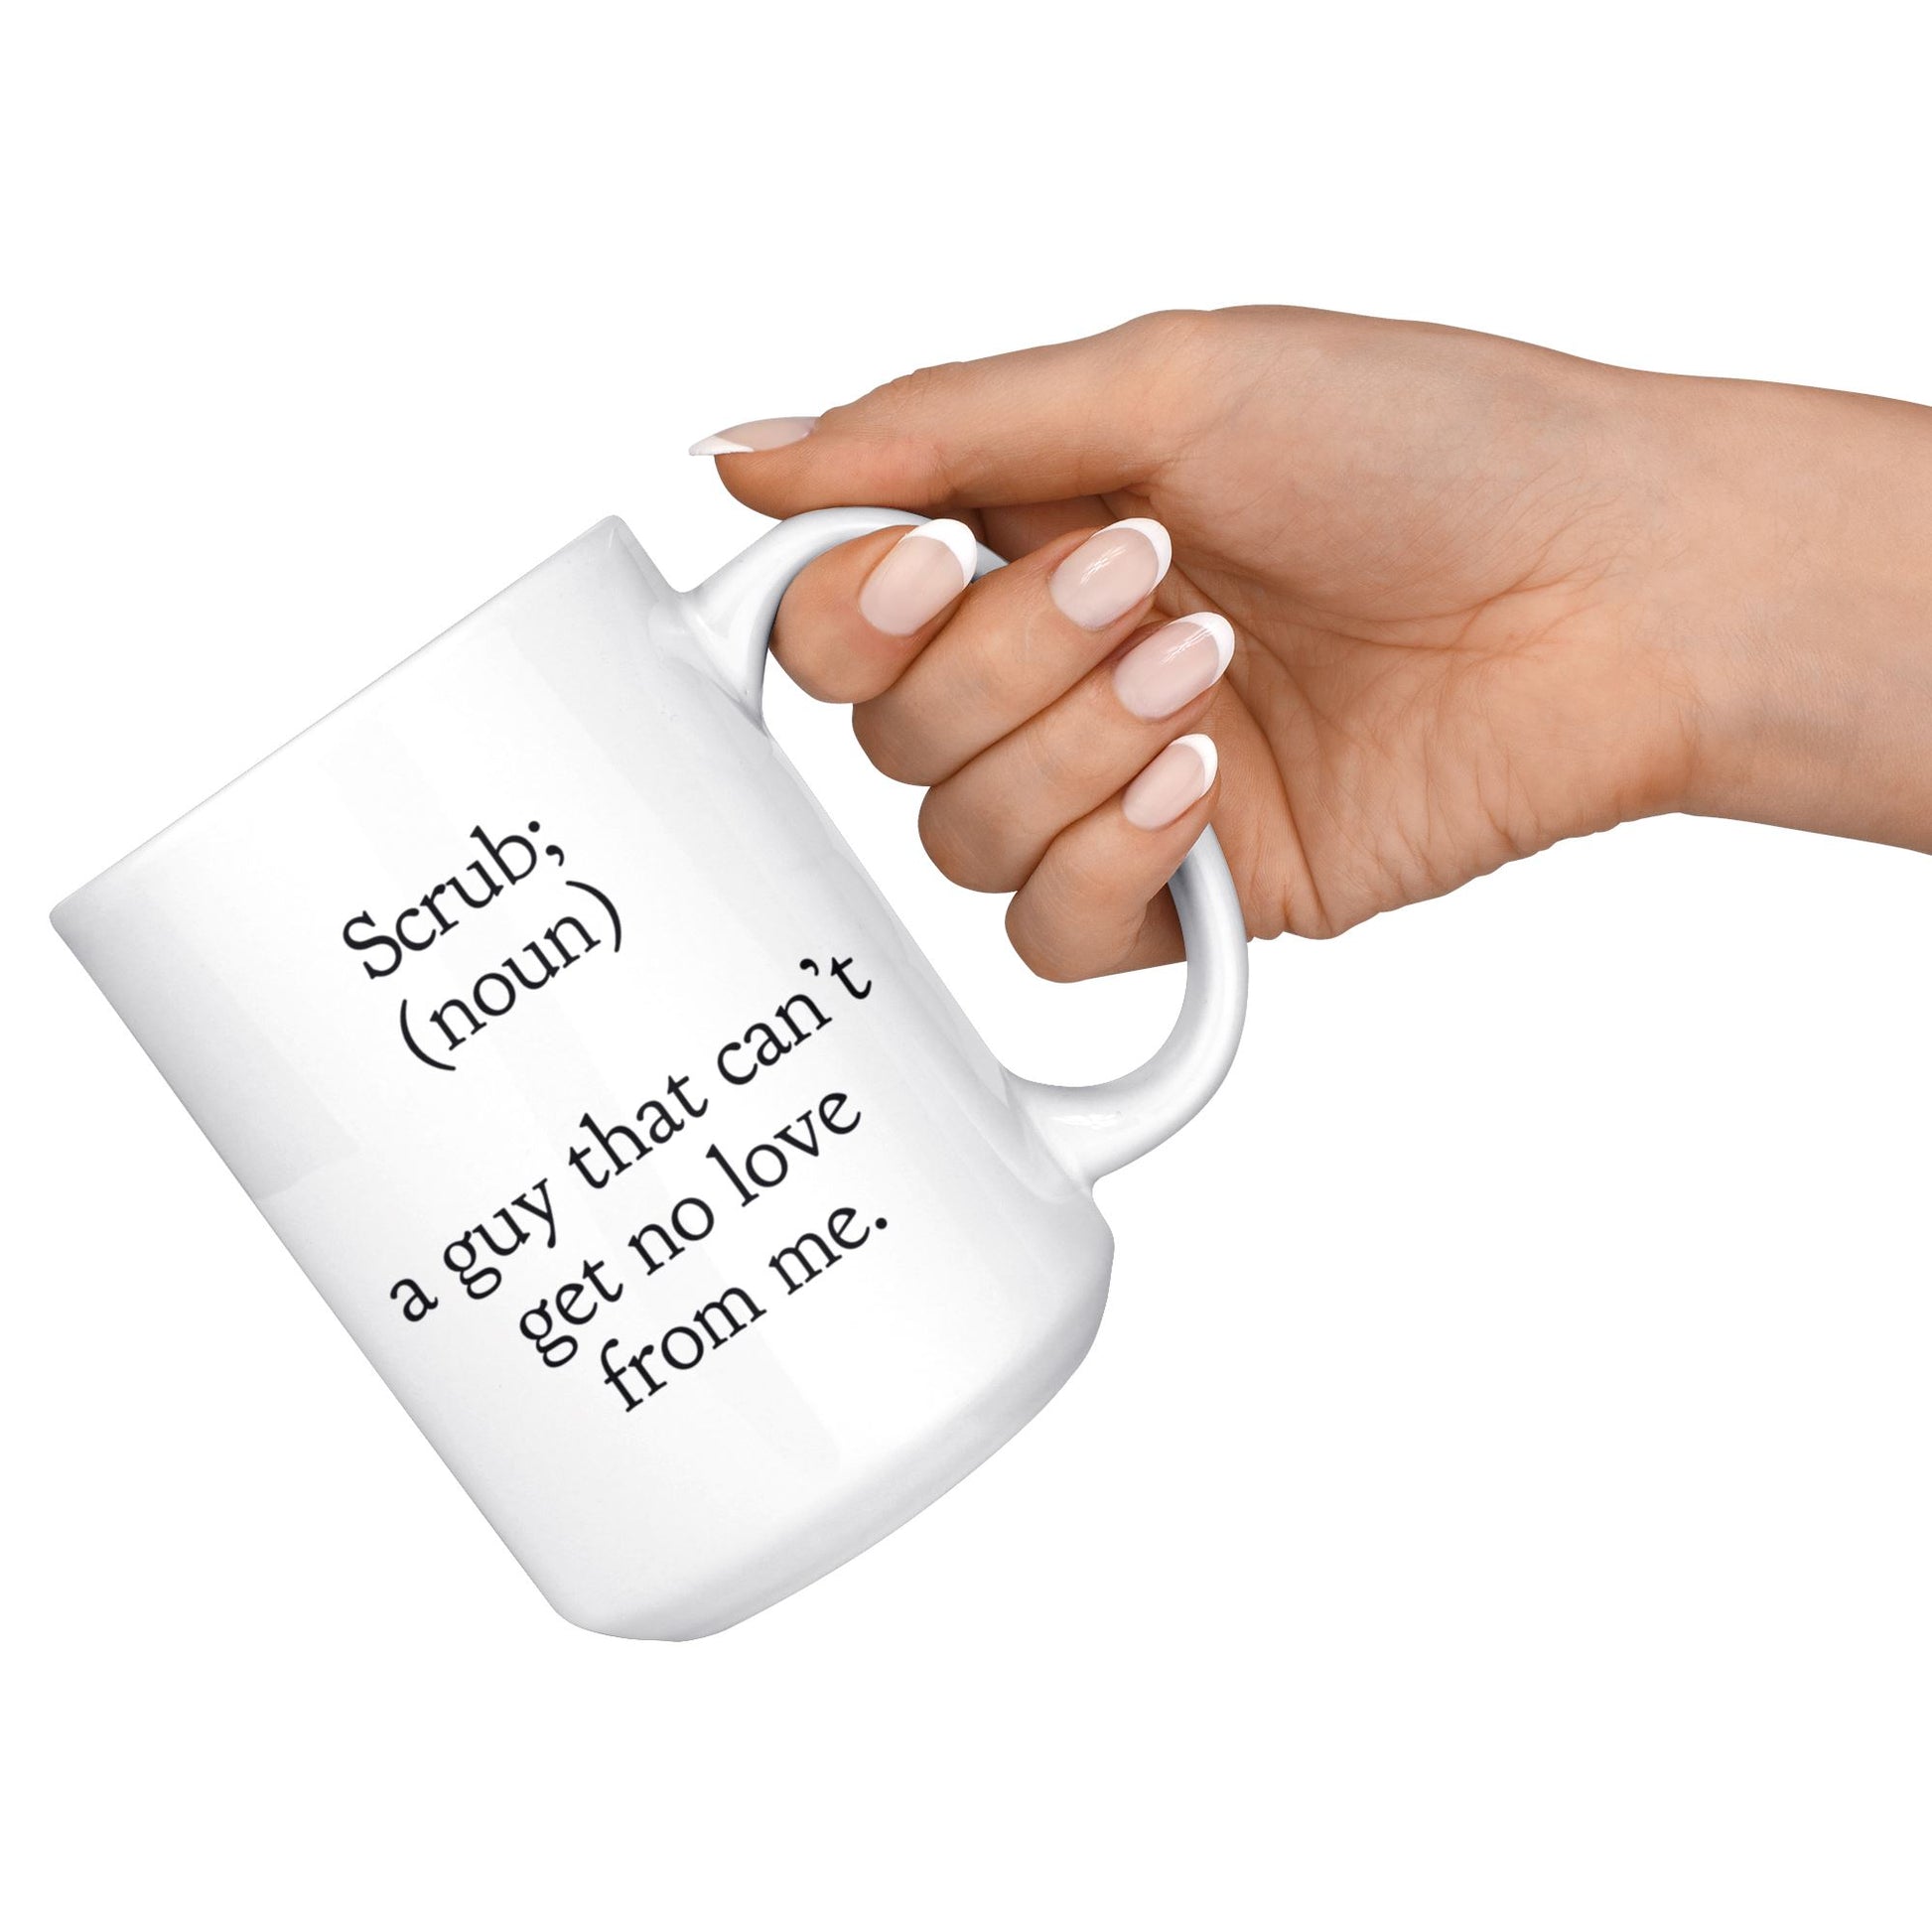 "Scrub - A Guy That Can't Get No Love From Me" - Coffee Mug Drinkware 